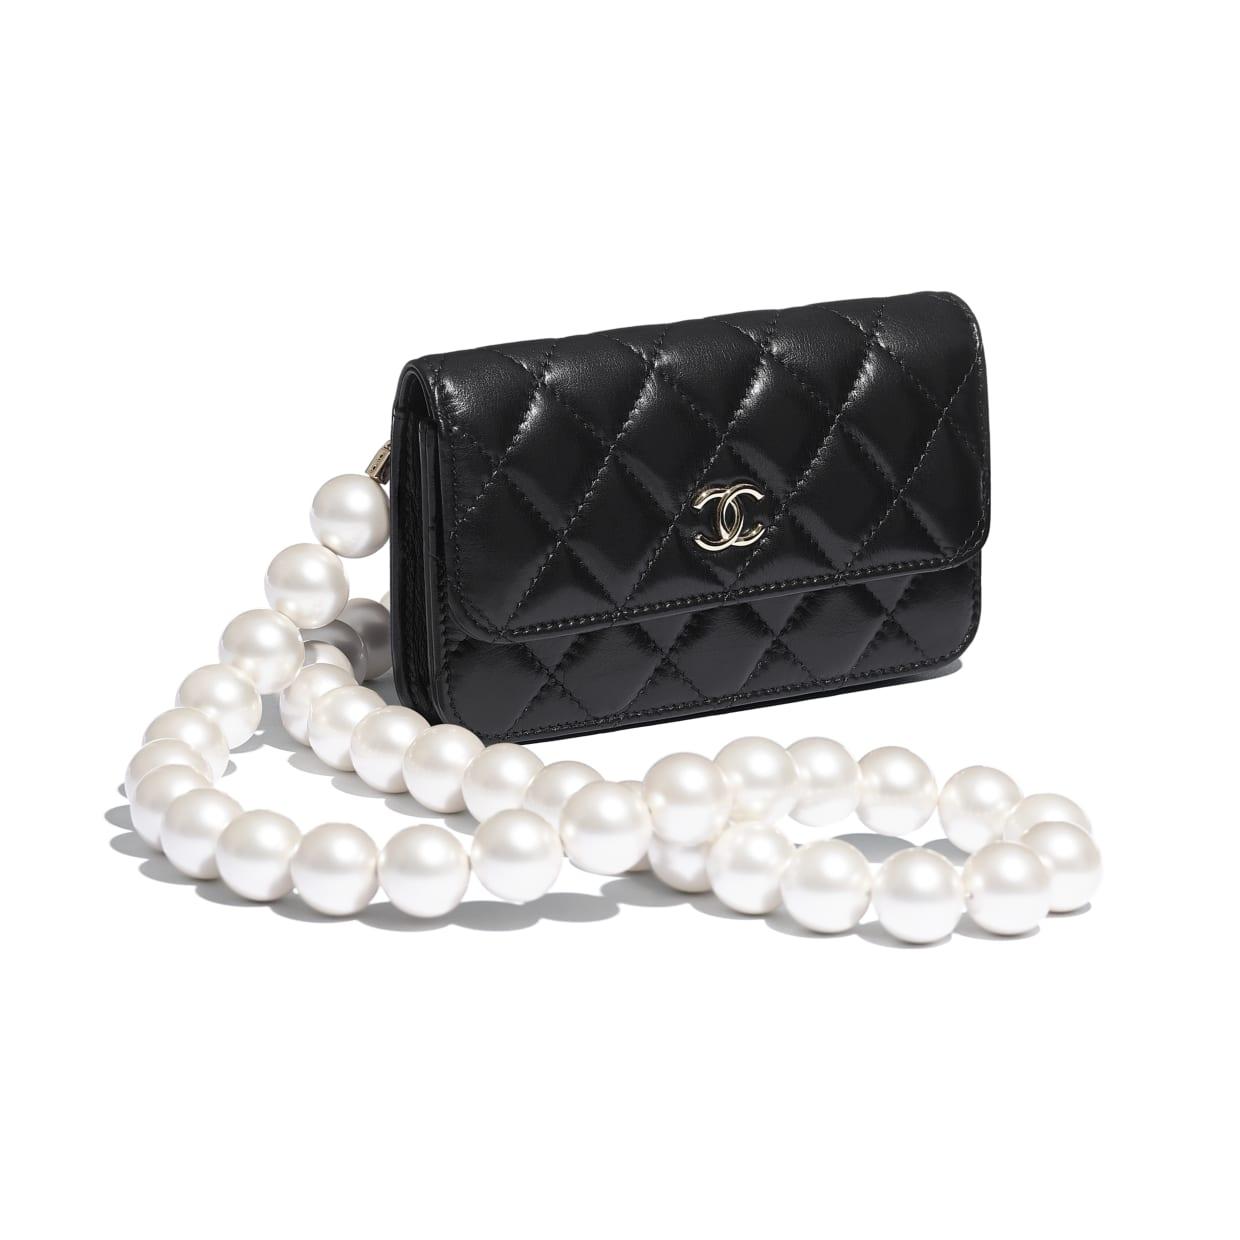 Chanel's Fall-Winter 2020/21 Collection is Finally Here - PurseBop